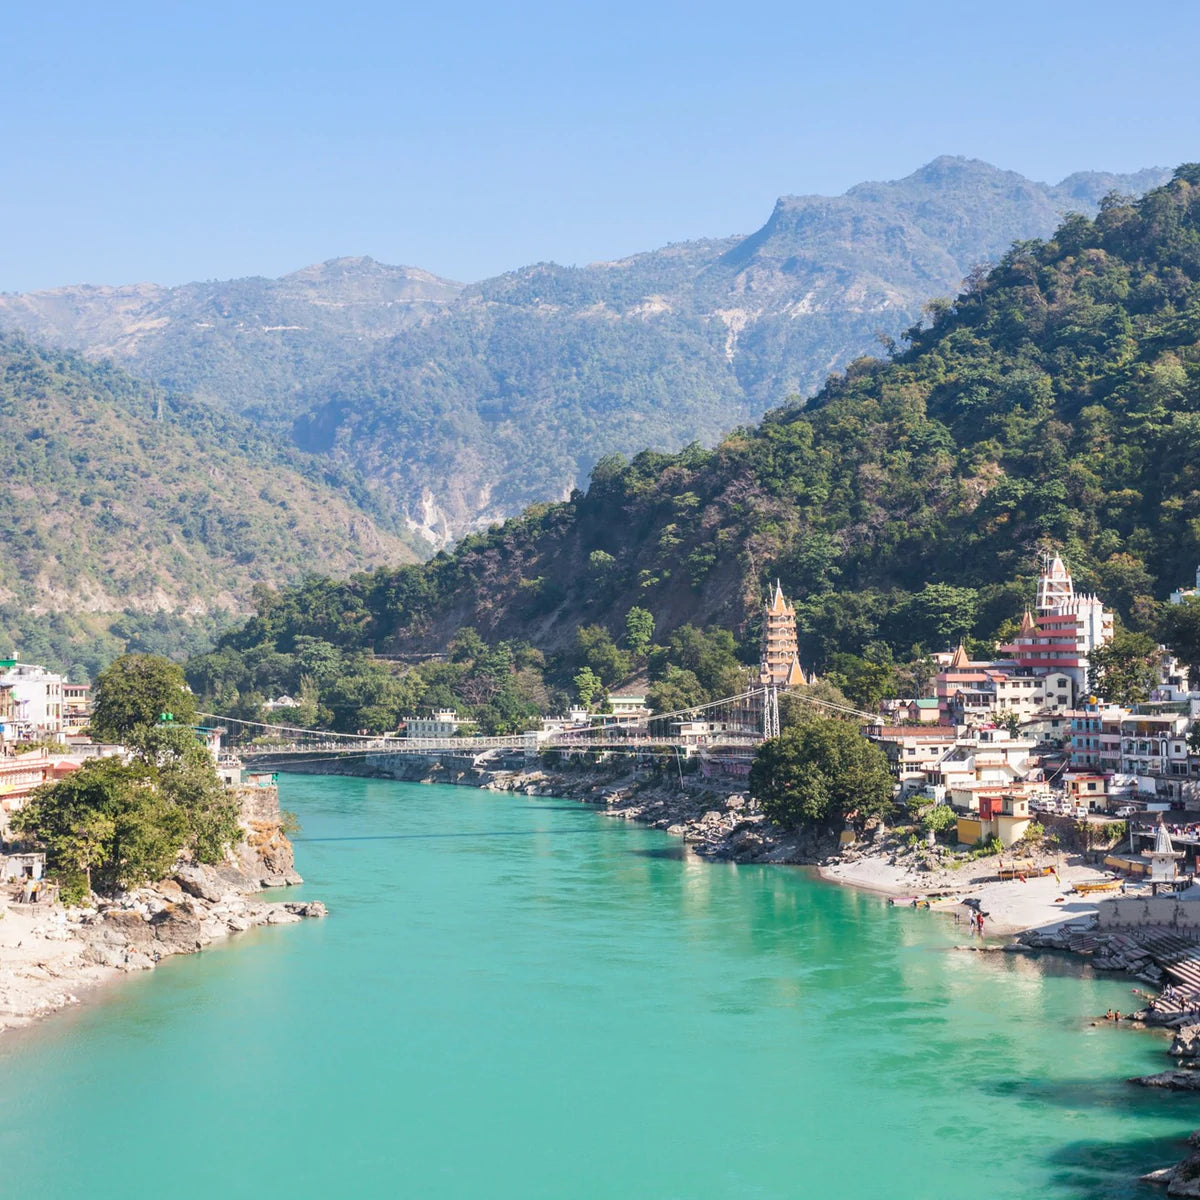 The Indian town of Rishikesh